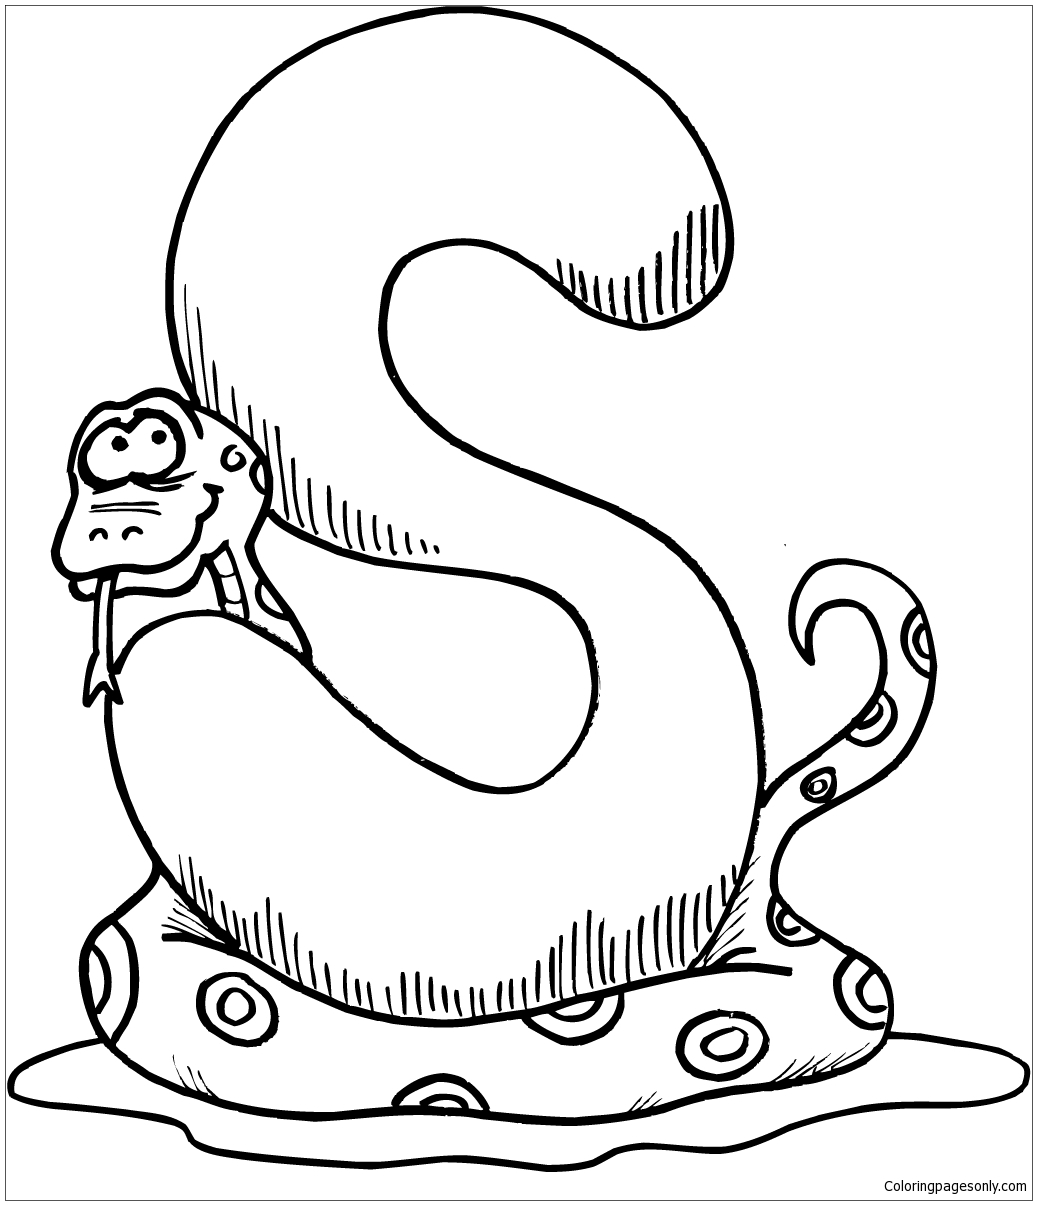 Letter S Coloring Page Abc Coloring Pages Coloring Pages Coloring